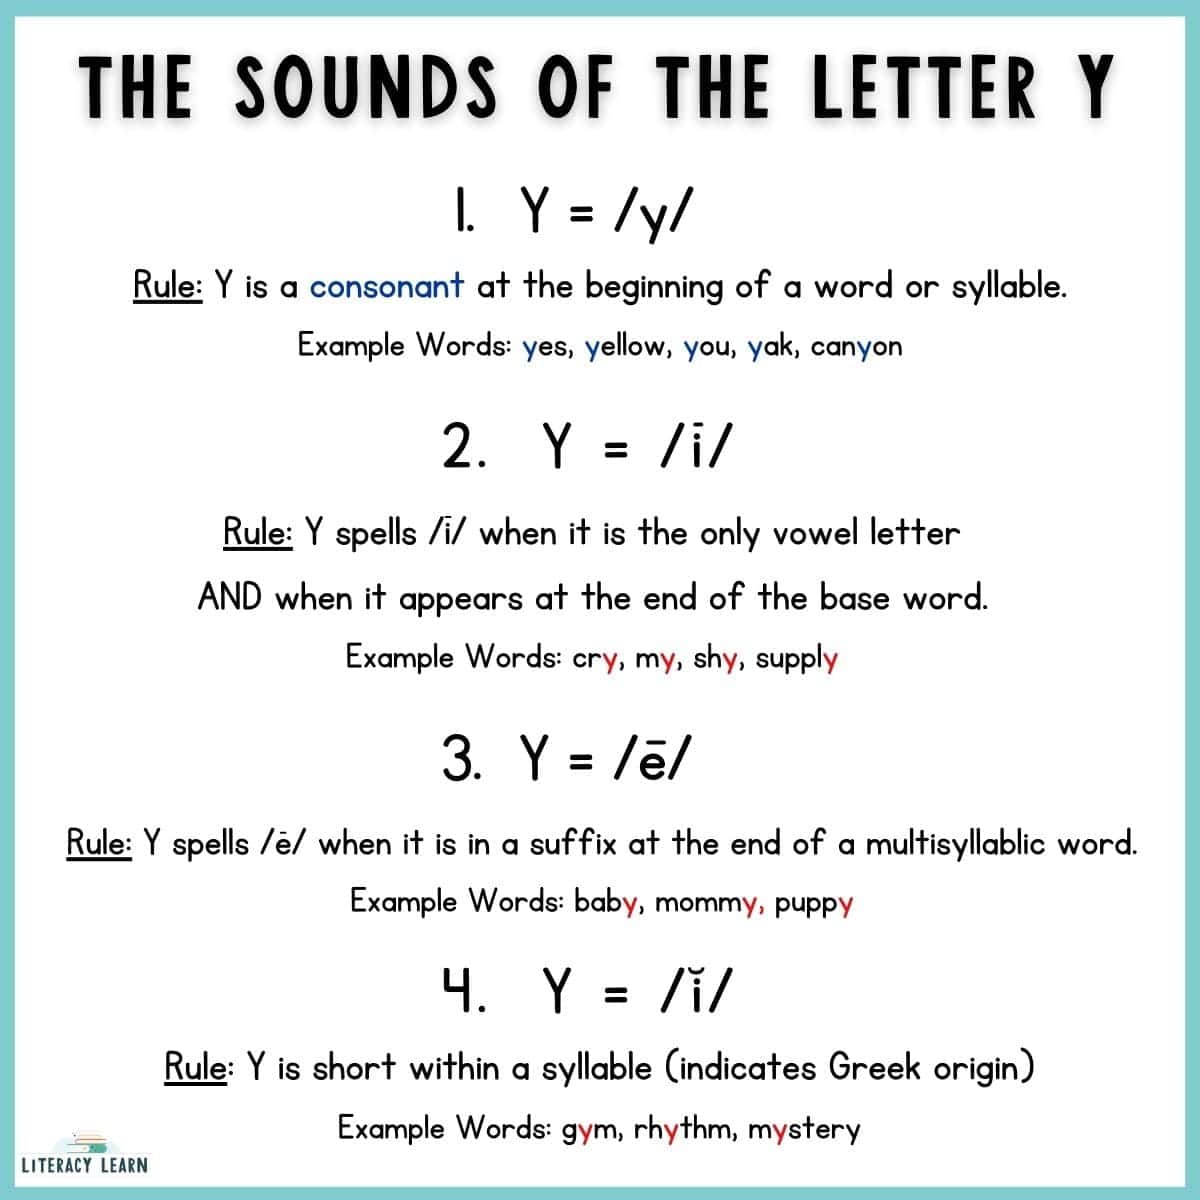 Graphic entitled "The sound of the letter Y" with the four sounds, rules, and examples.